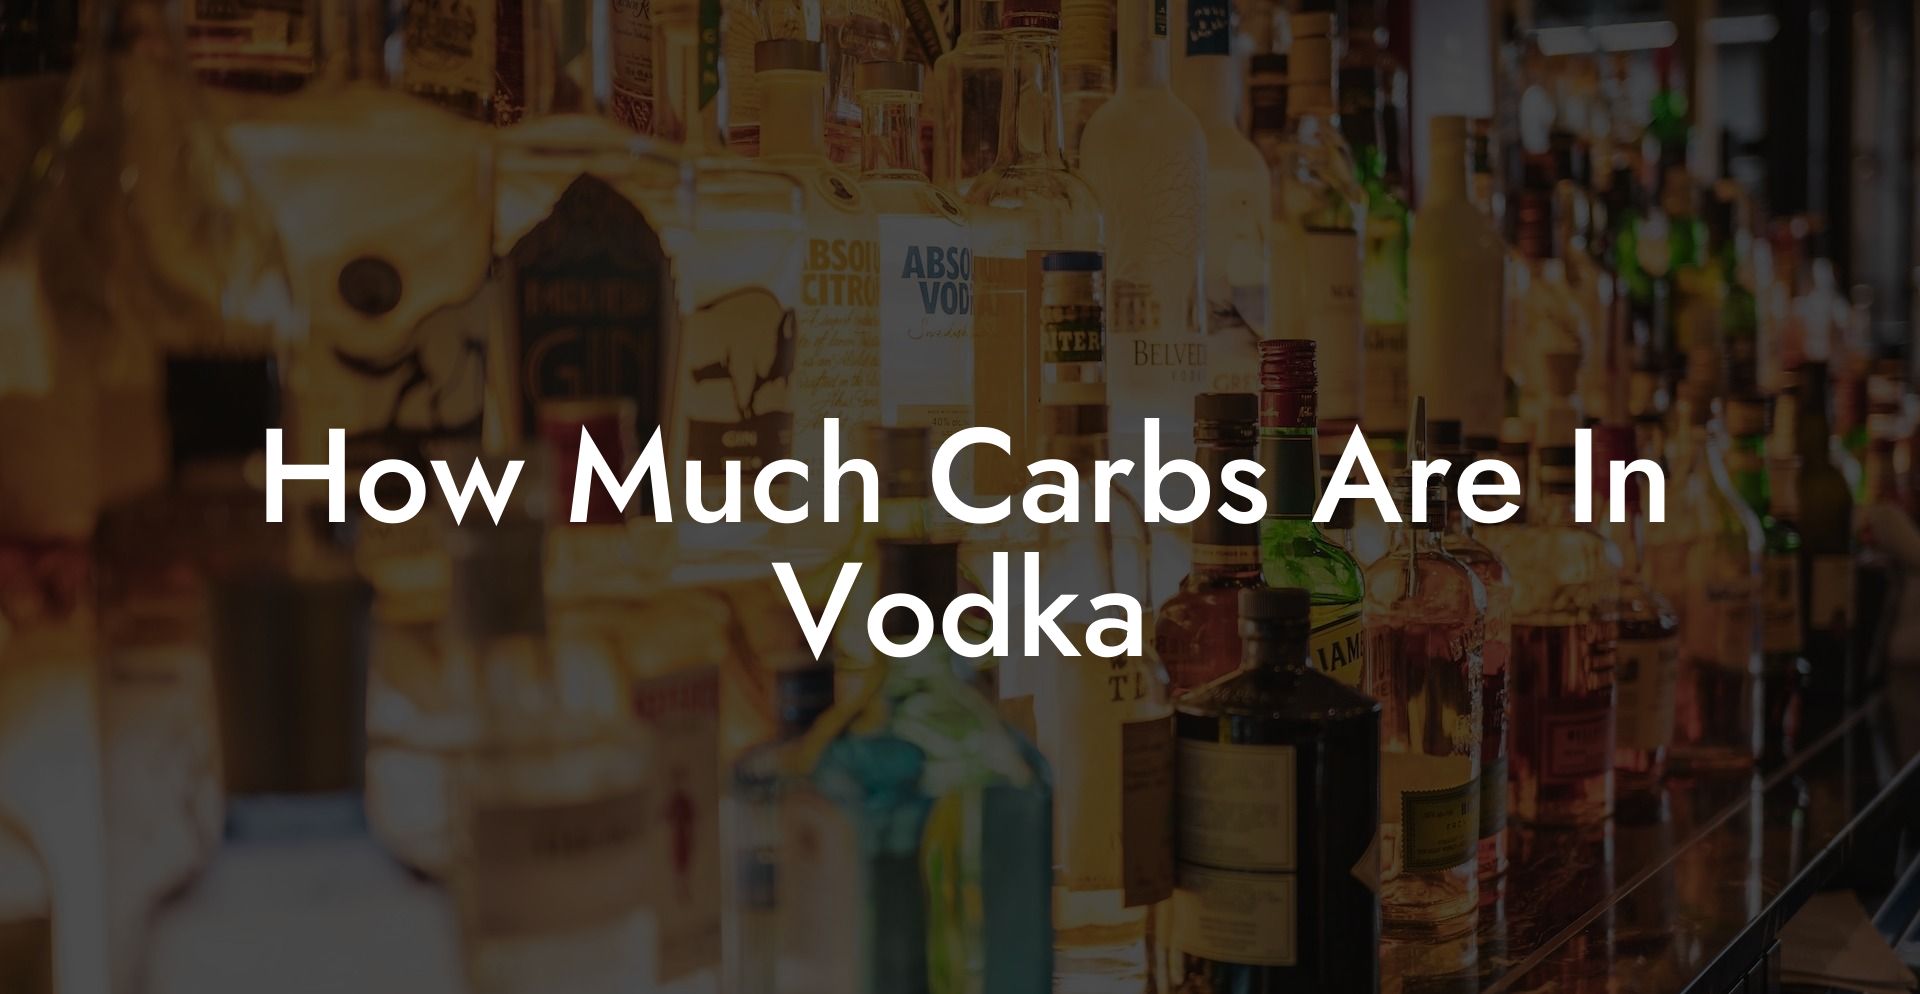 How Much Carbs Are In Vodka